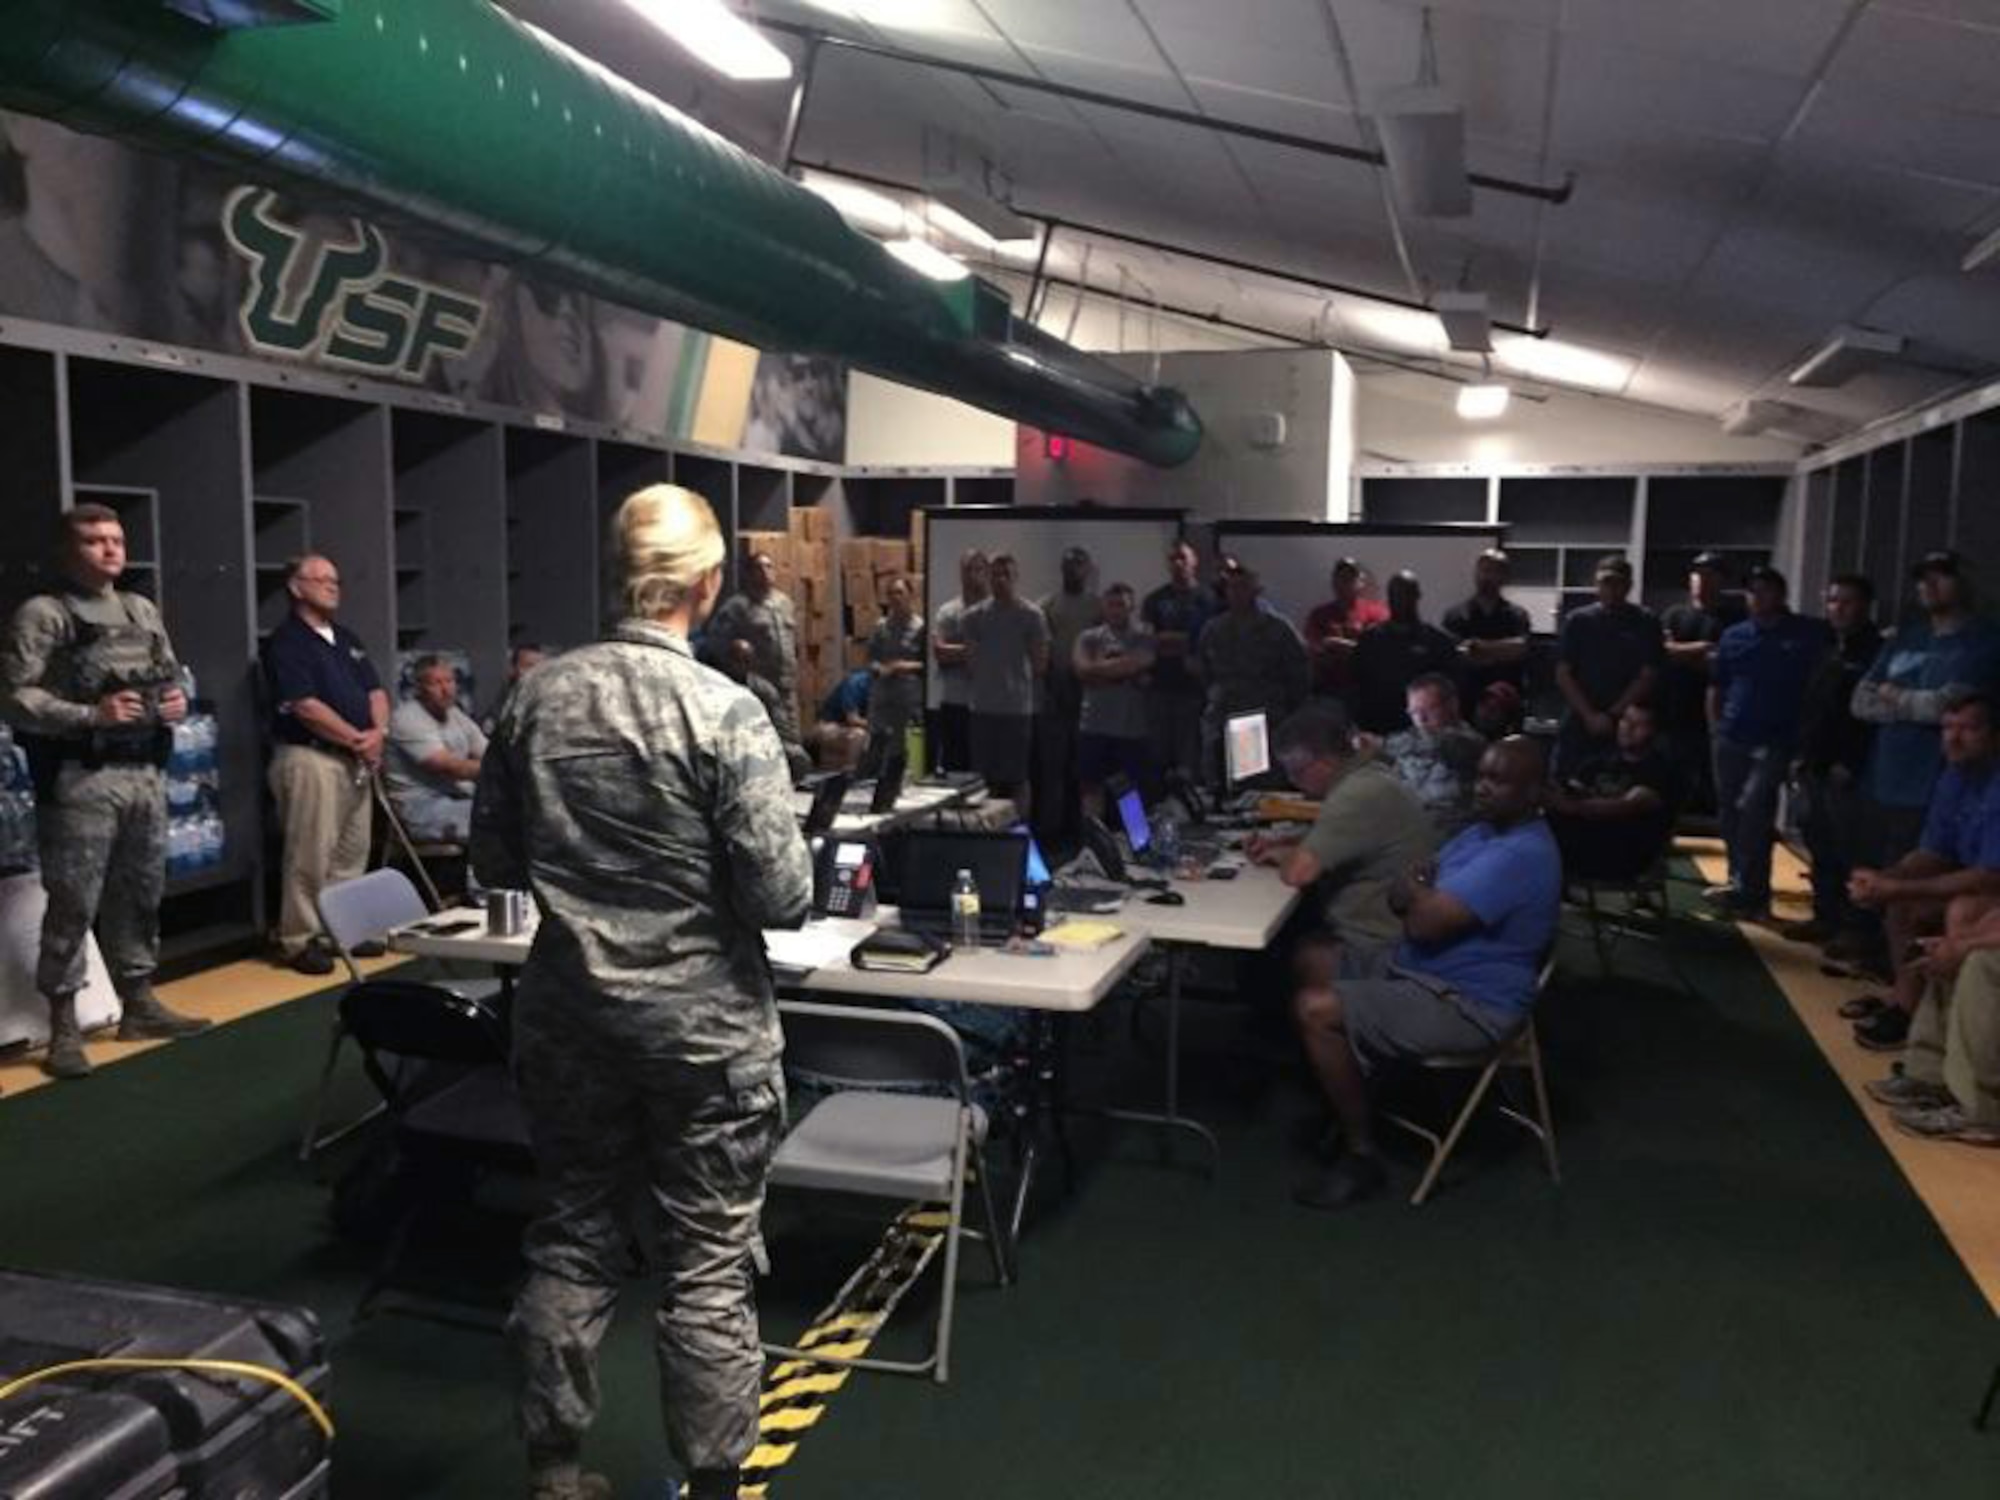 U.S. Air Force Col. April Vogel, commander of the 6th Air Mobility Wing, speaks to the Hurricane Ride-Out Team during Hurricane Irma in the locker room at Raymond James Stadium, Tampa, Fla, Sept. 9, 2017.